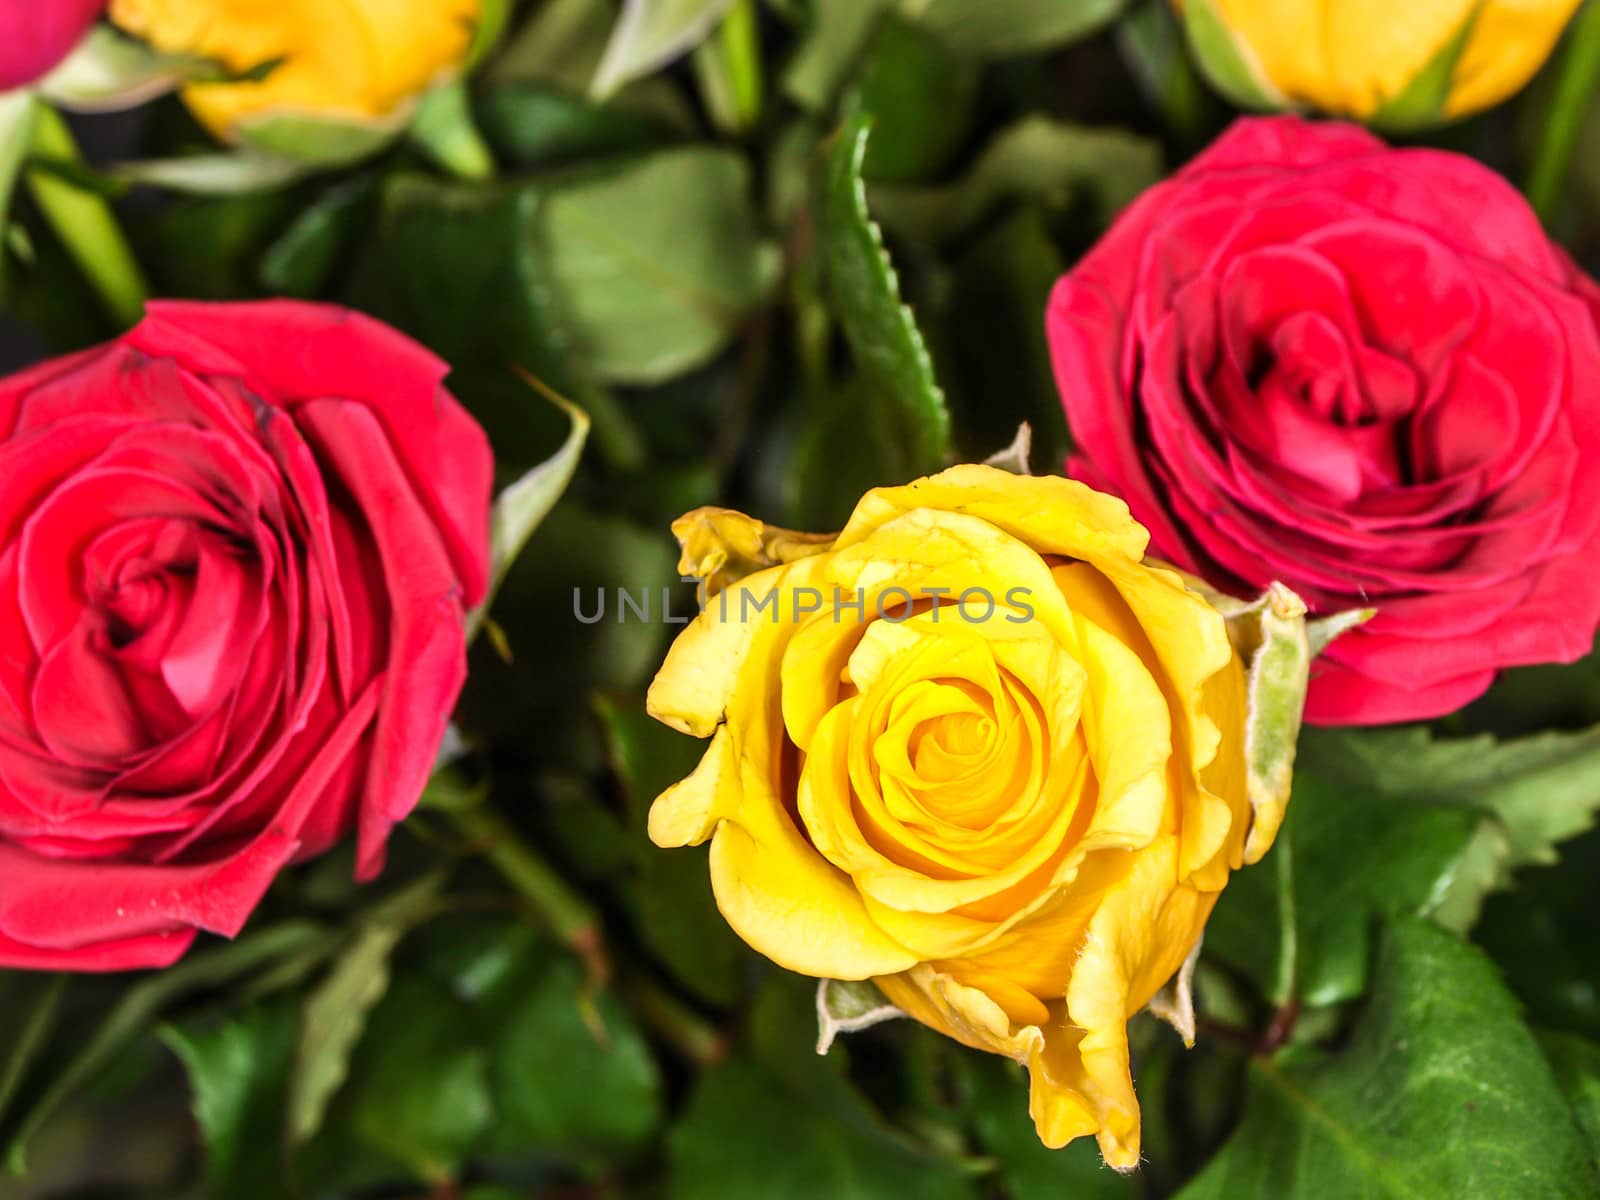 Yellow and pink roses by Arvebettum